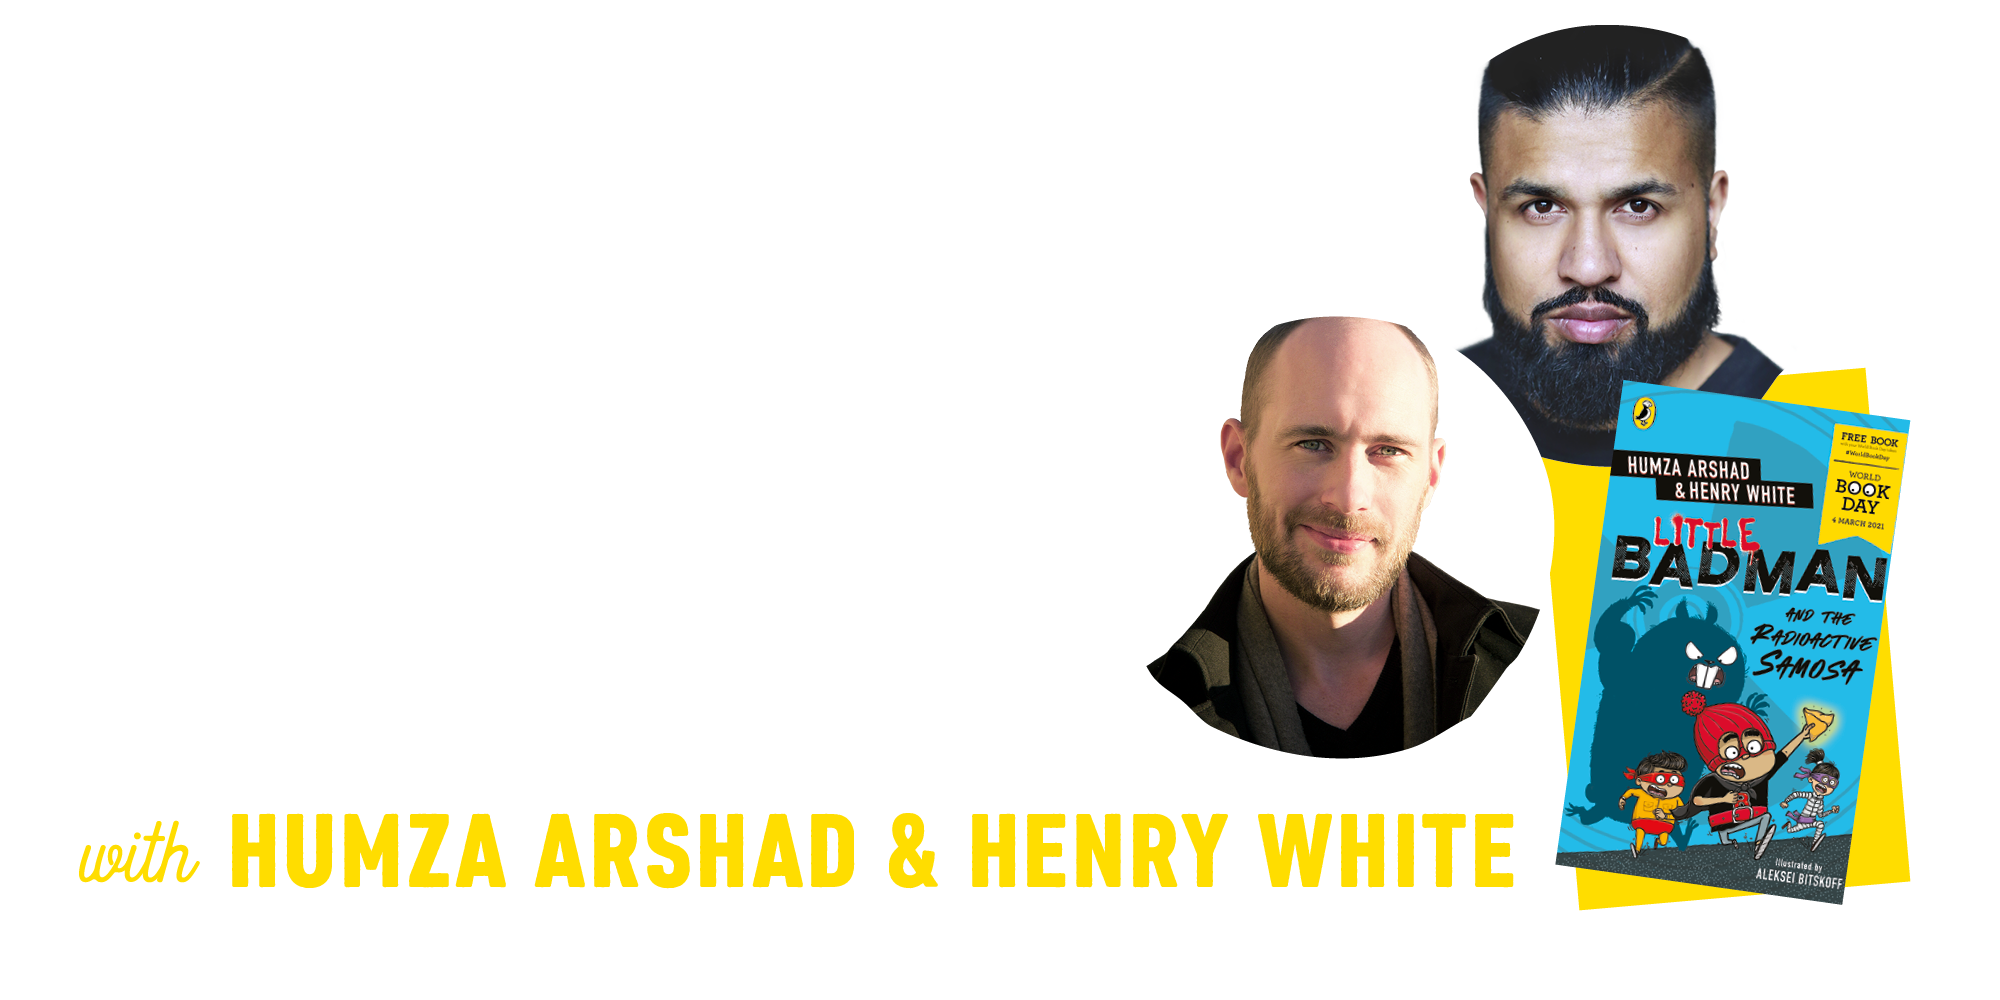 Author & Illustrator Academy: Don’t judge a book by its cover